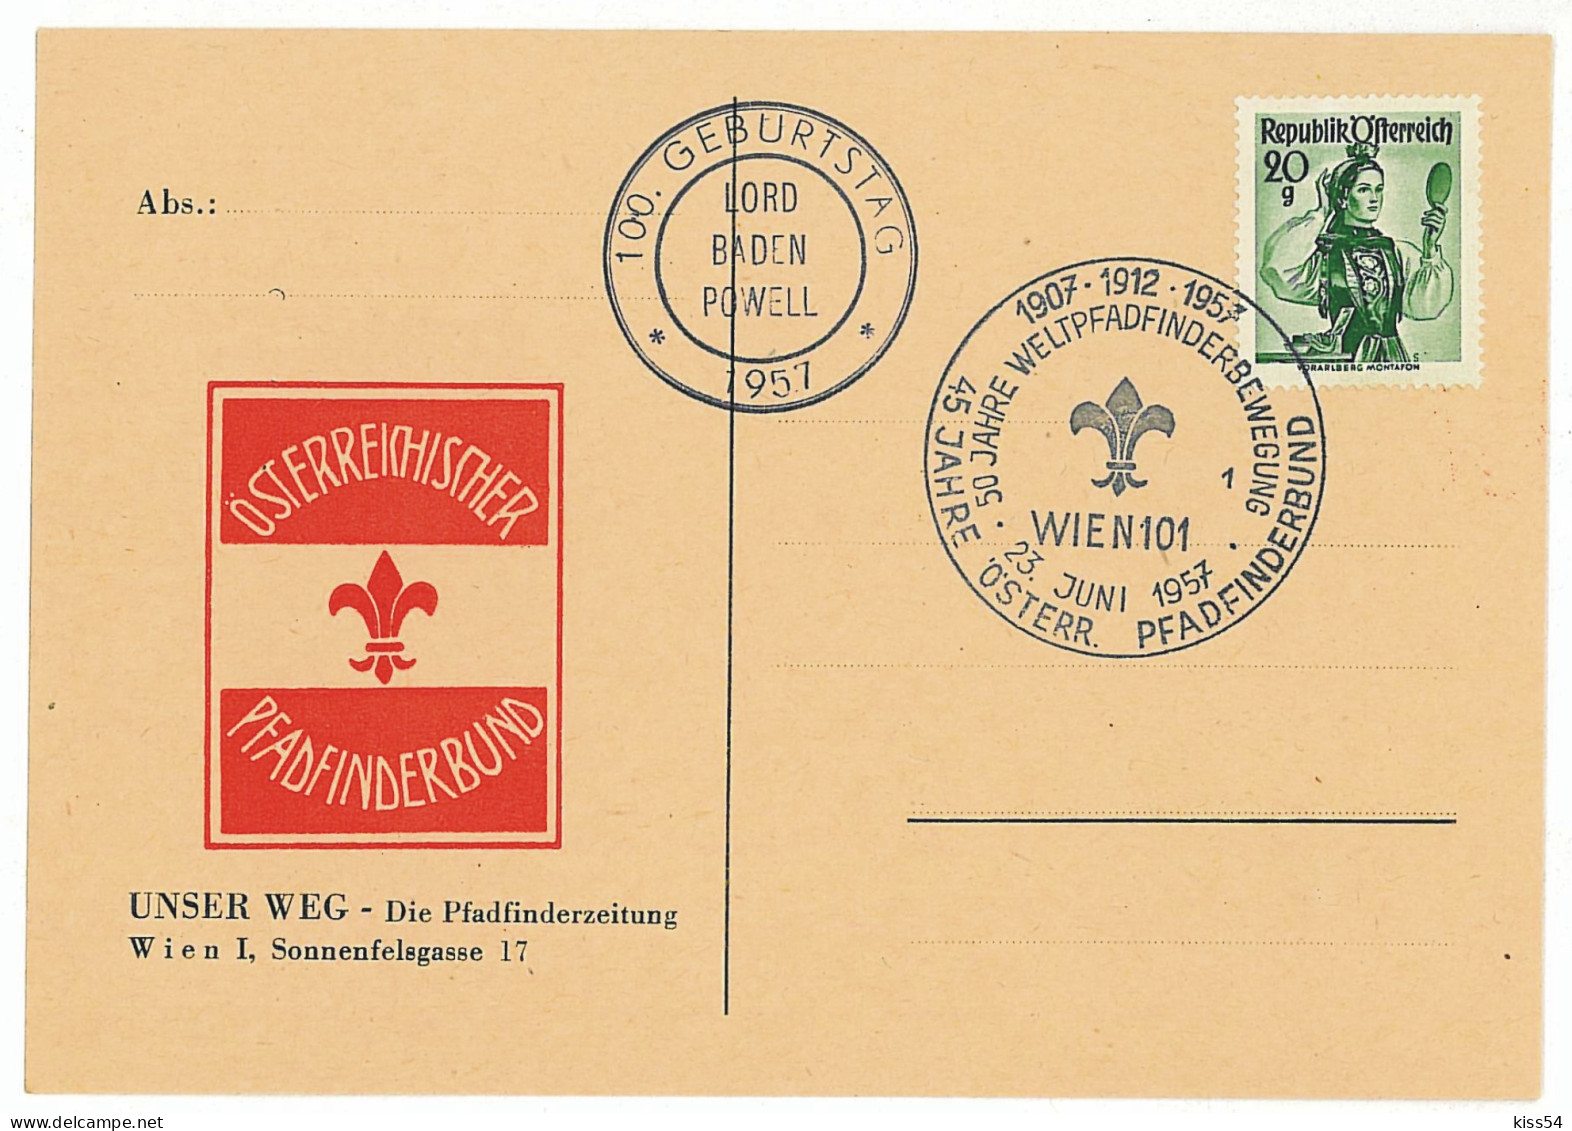 SC 49 - 609-a AUSTRIA, Scout - Cover - Used - 1957 - Covers & Documents